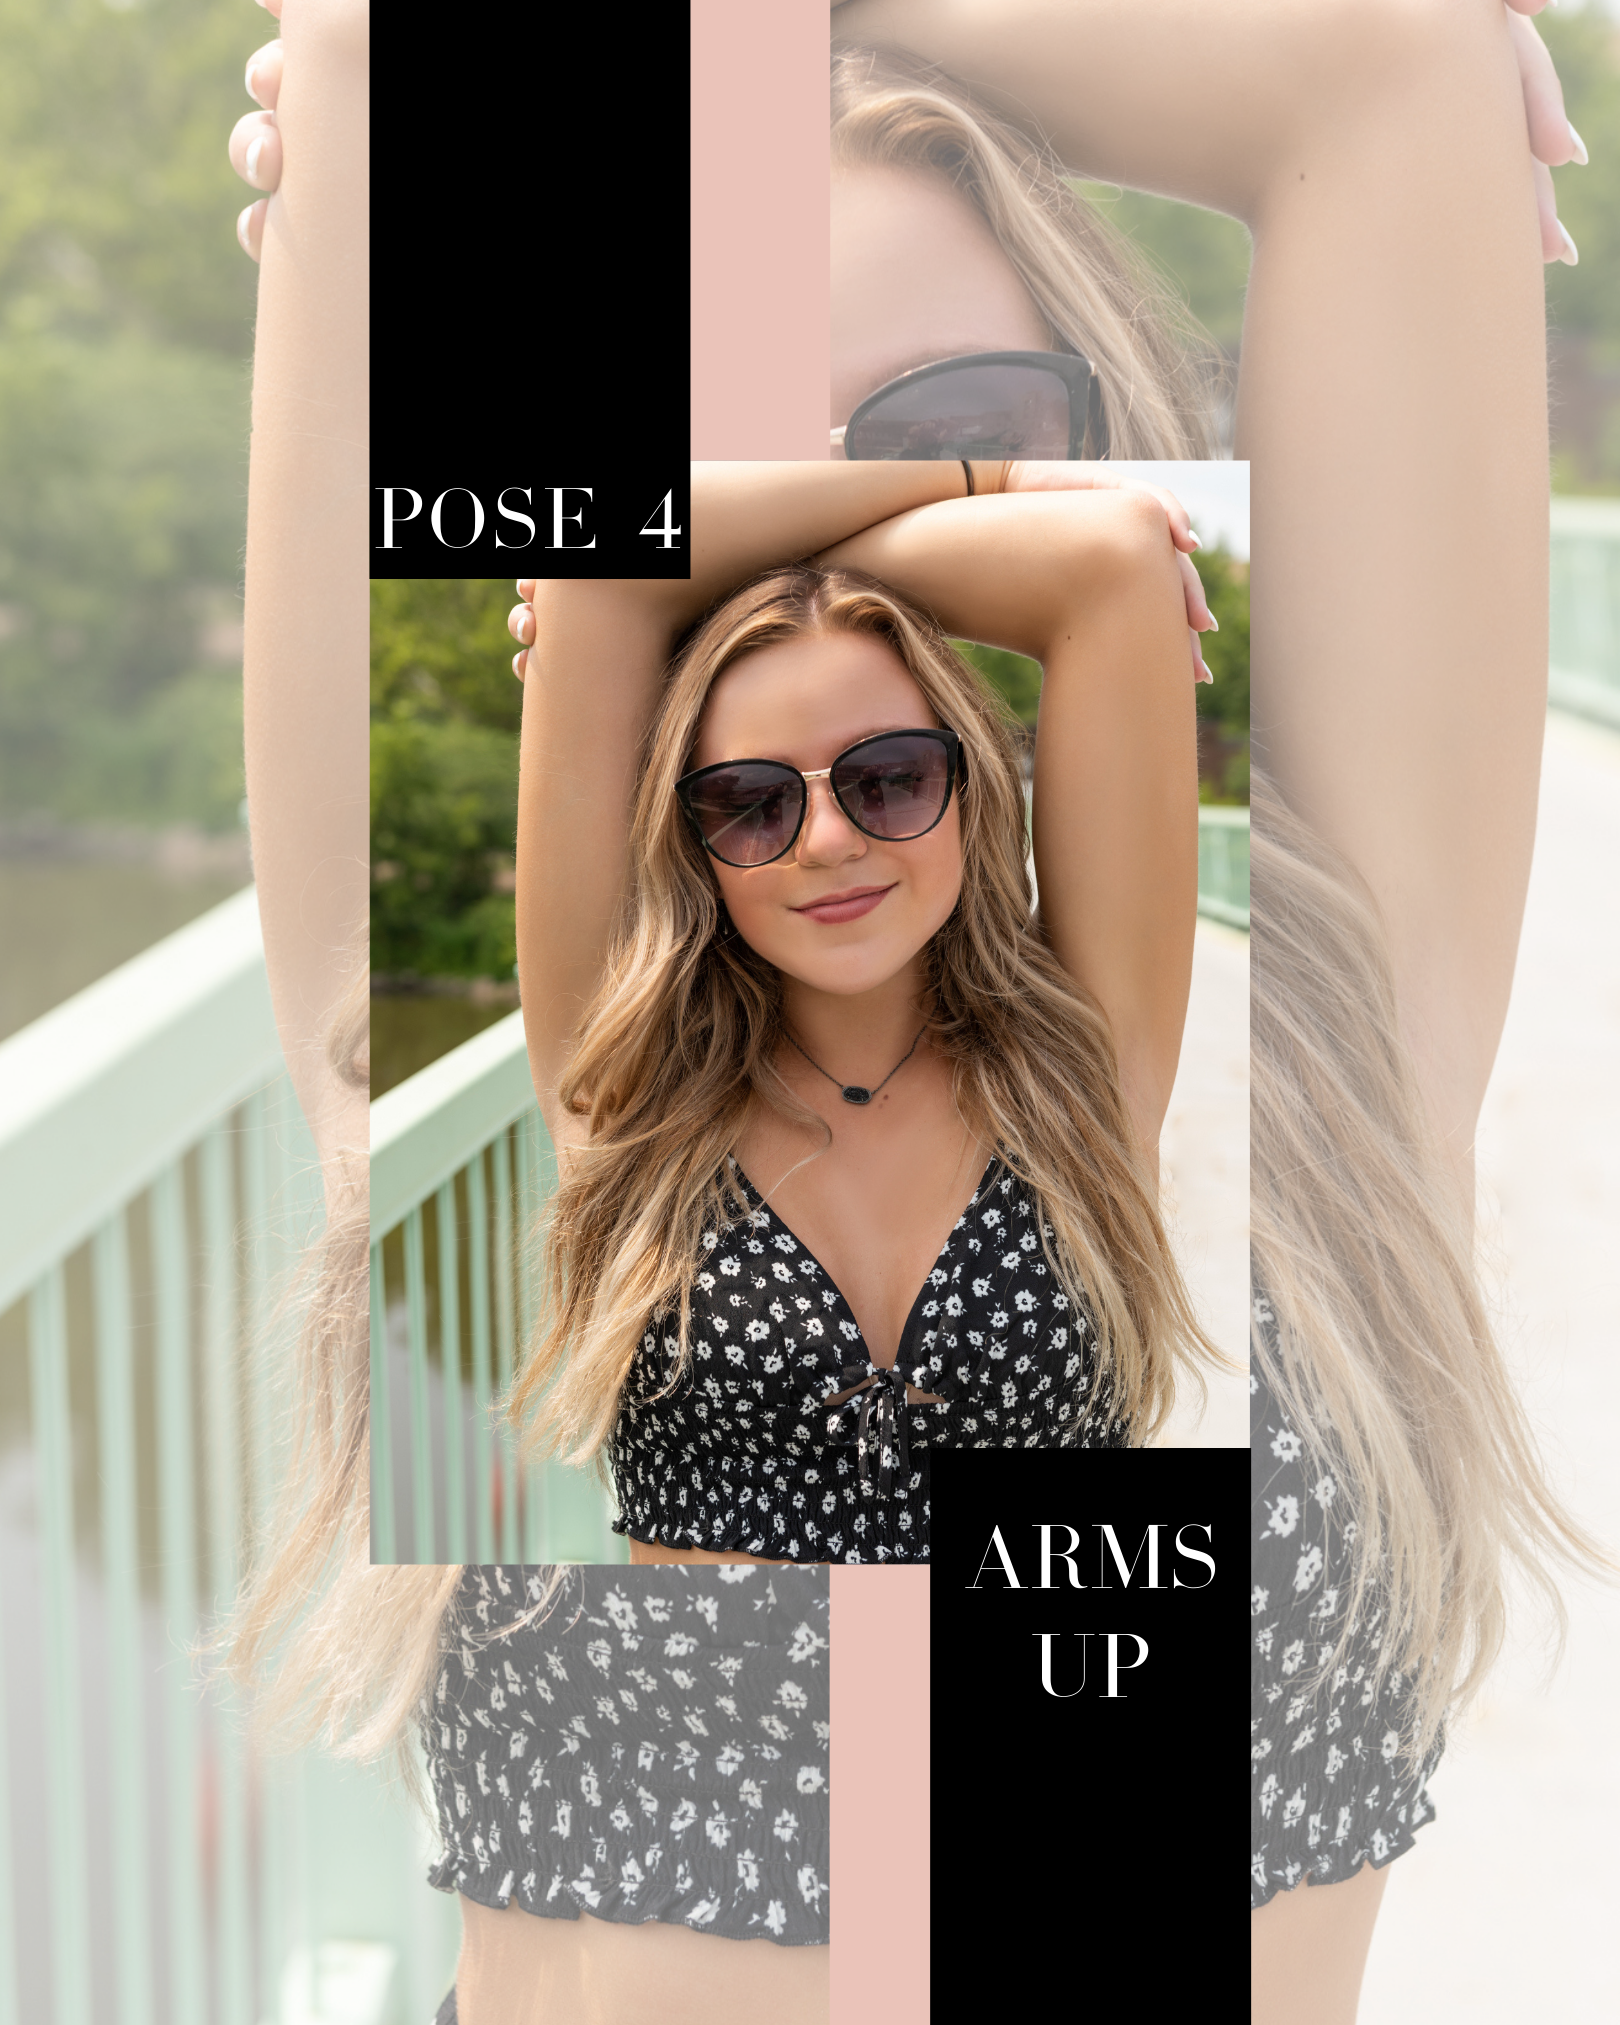 bronde hair senior girl with black sunnies and cute arms up pose